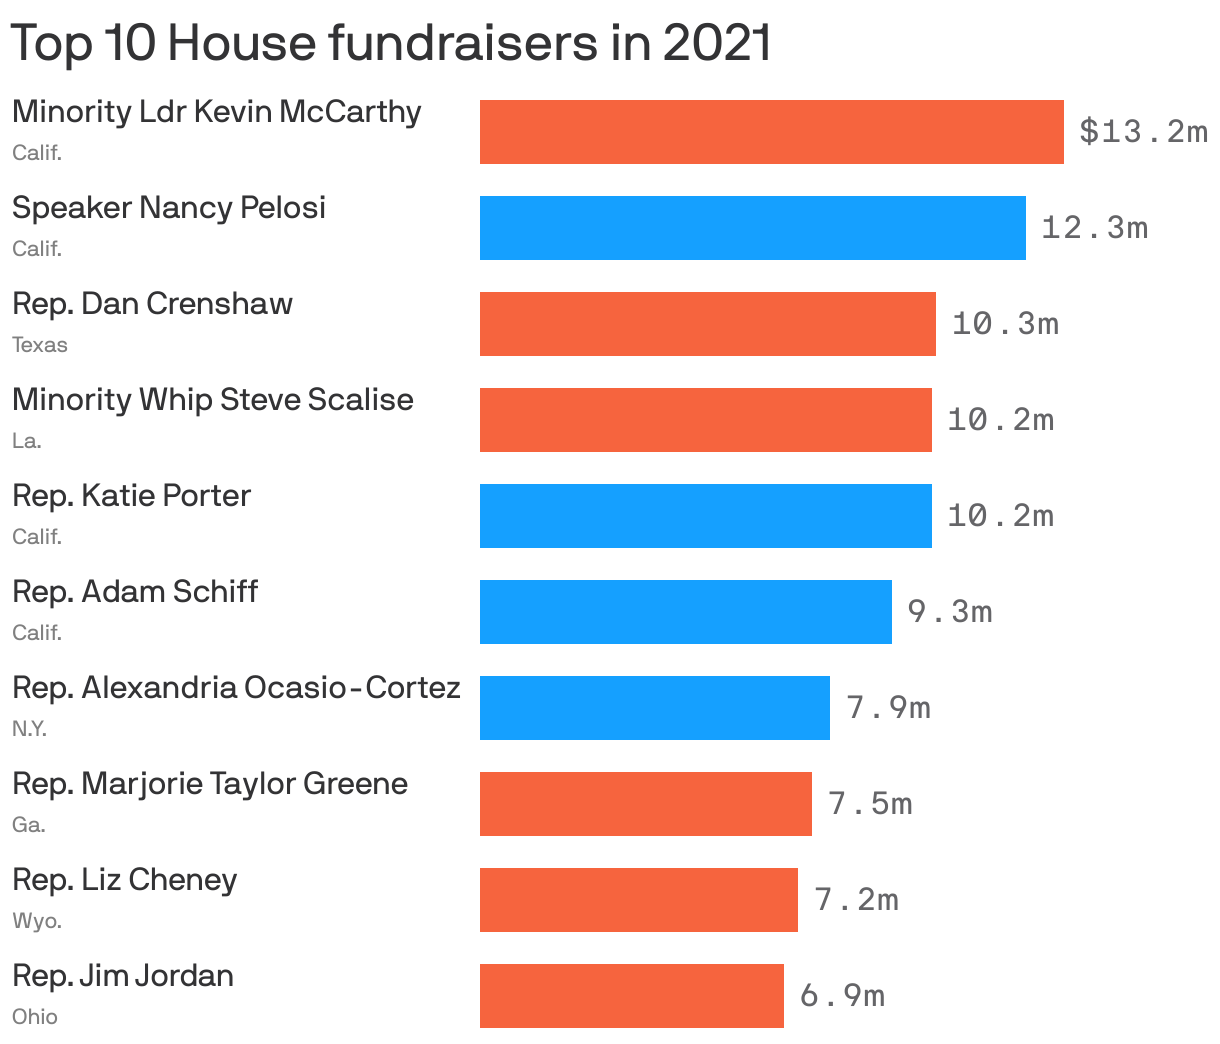 Top 10 House fundraisers in 2021